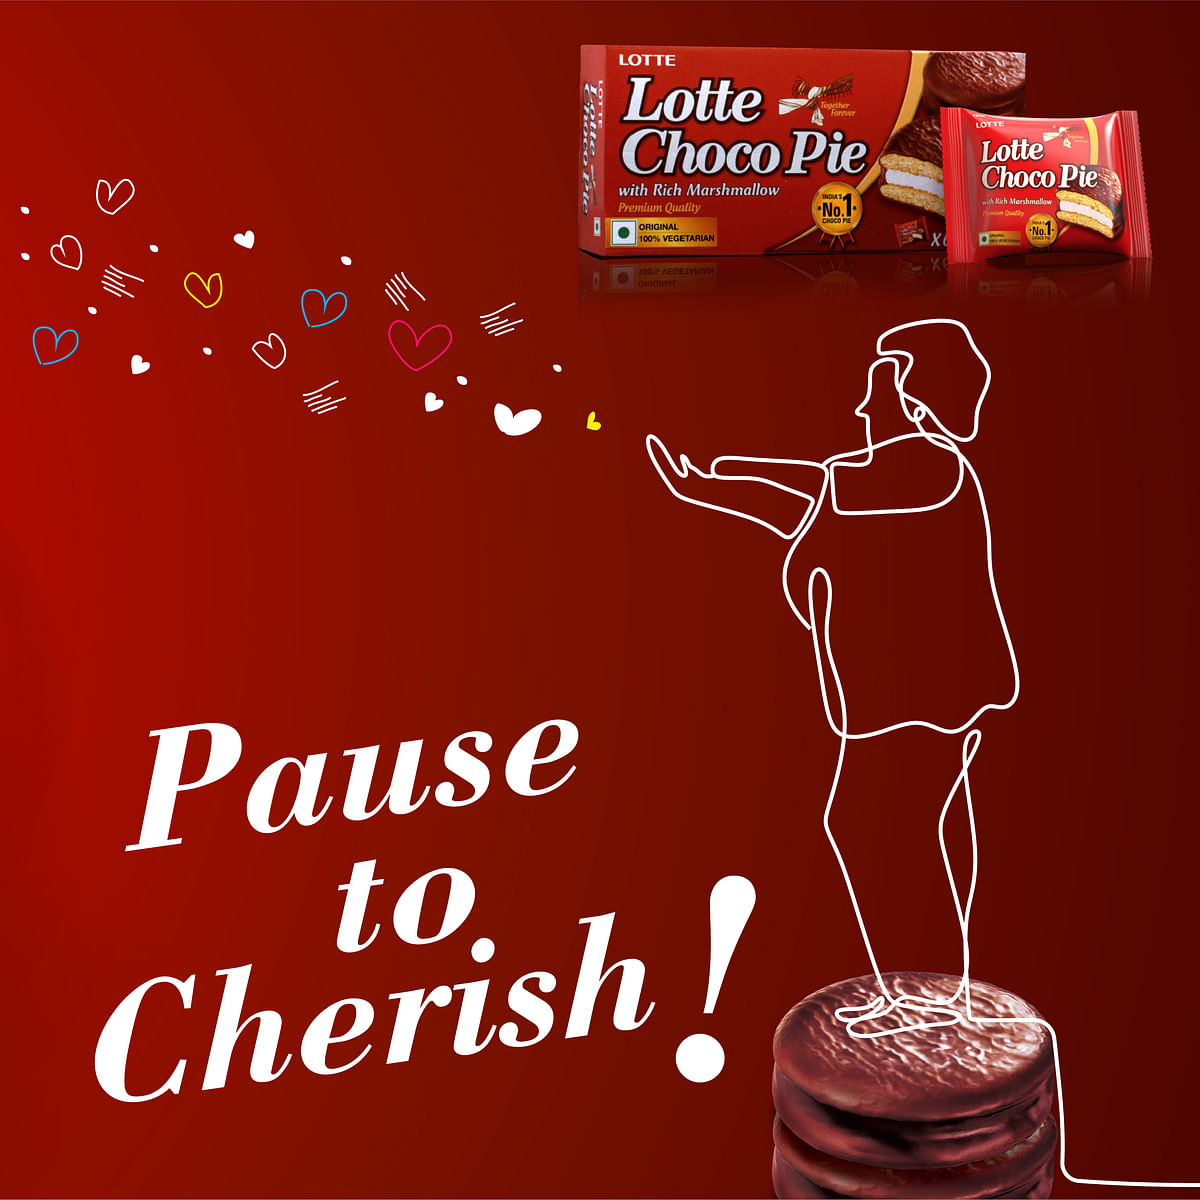 Lotte Choco Pie Creates First-Ever Valentine’s Day campaign